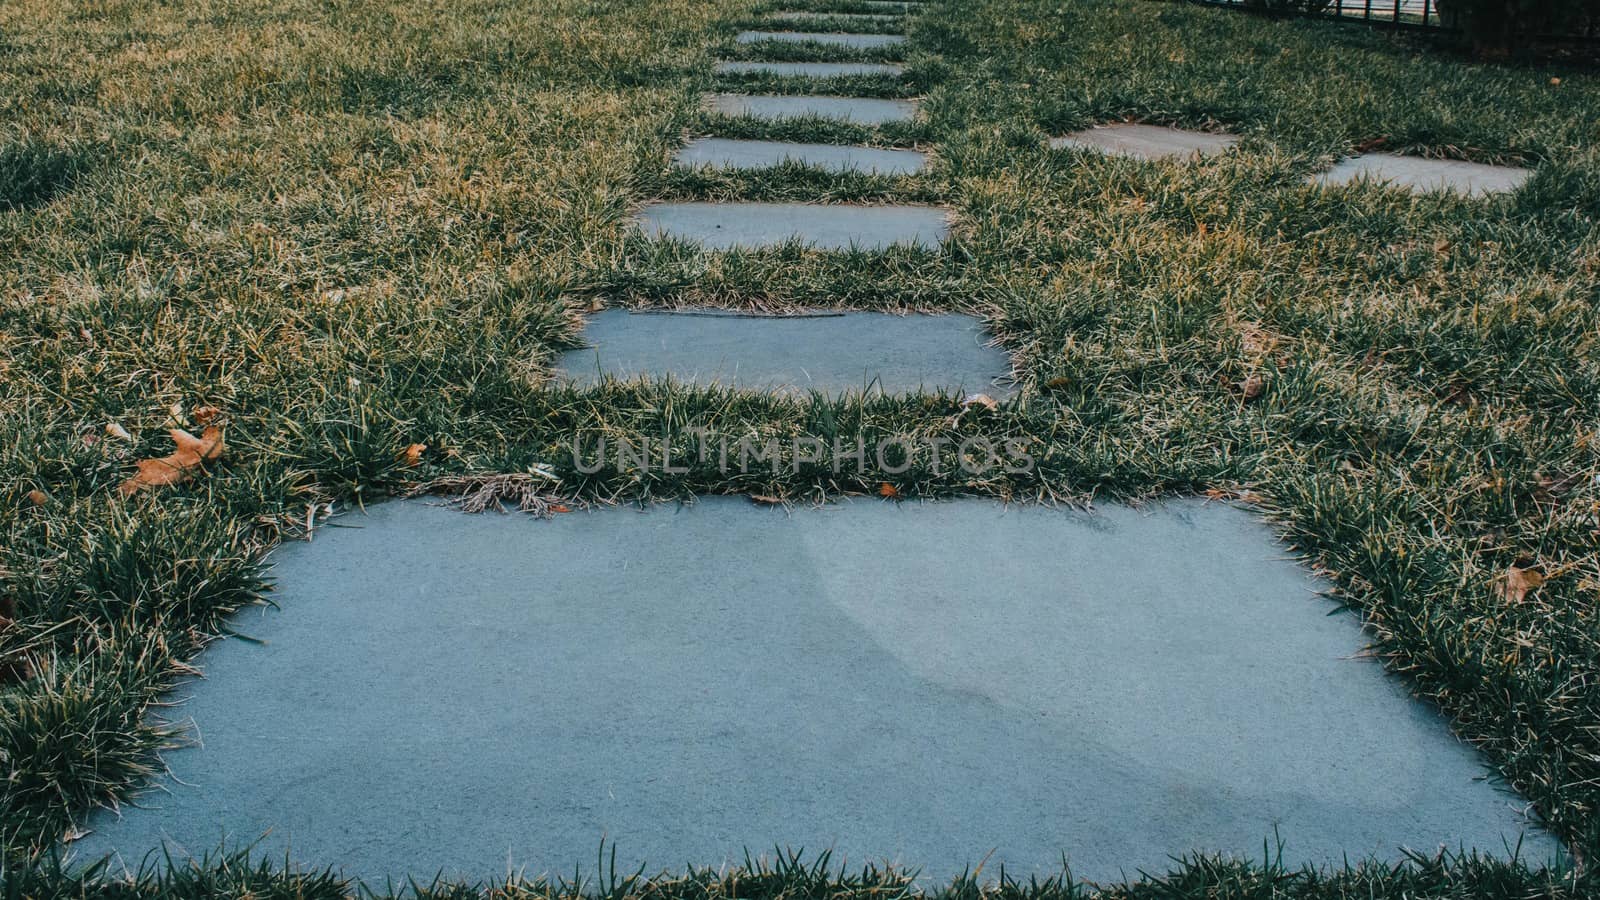 A Pathway of Blue Stones in a Grass Field Leading To the Top of the Frame